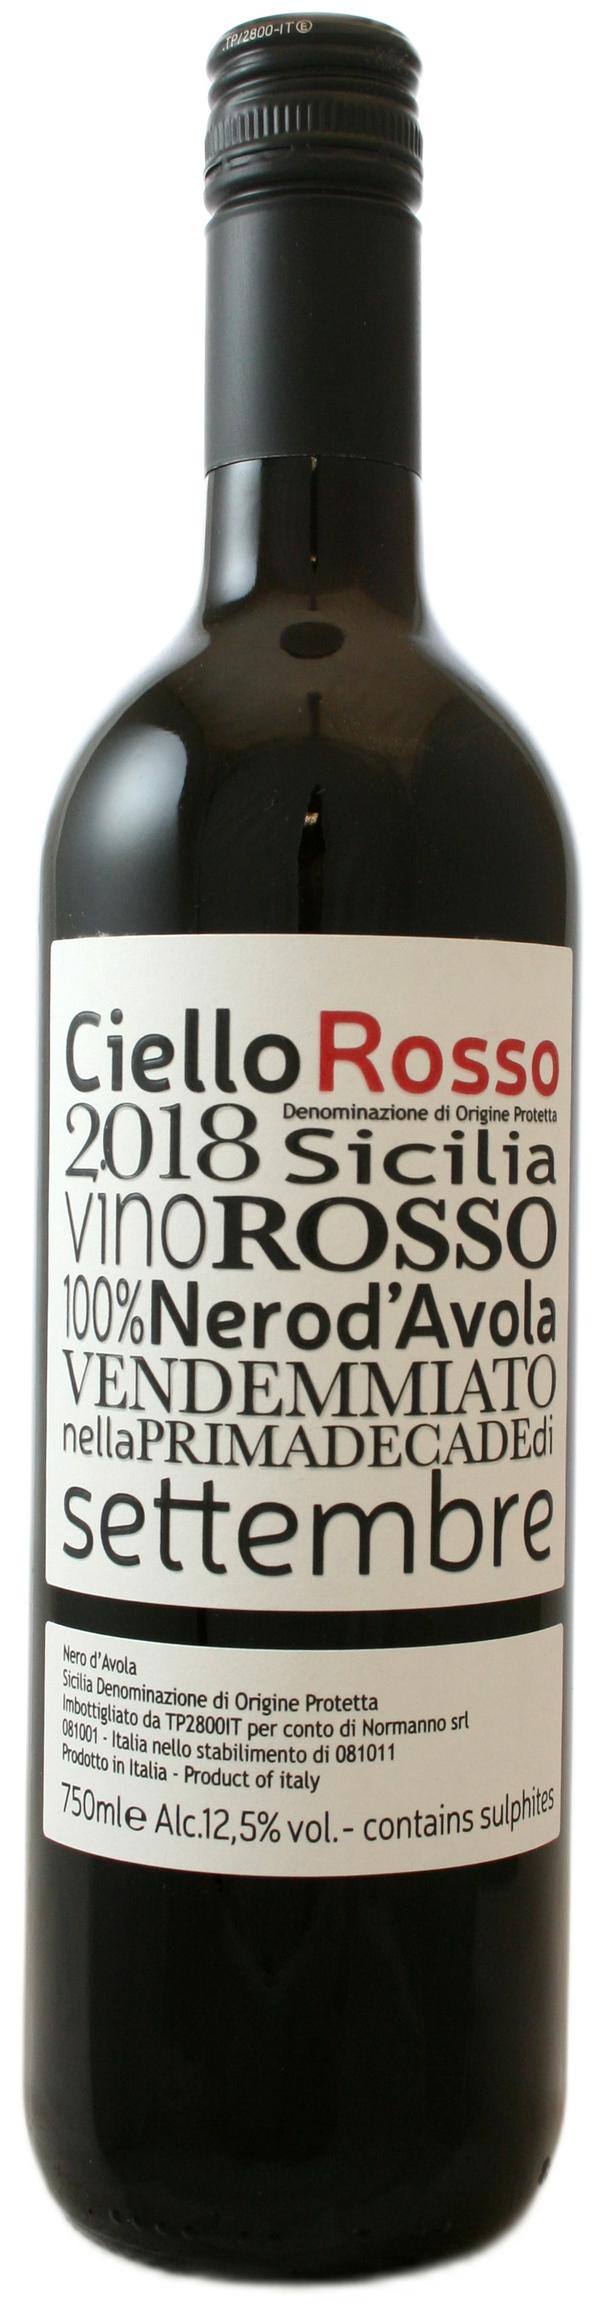 ALL THINGS DRINKS - Ciello Rosso Italian Red Wine